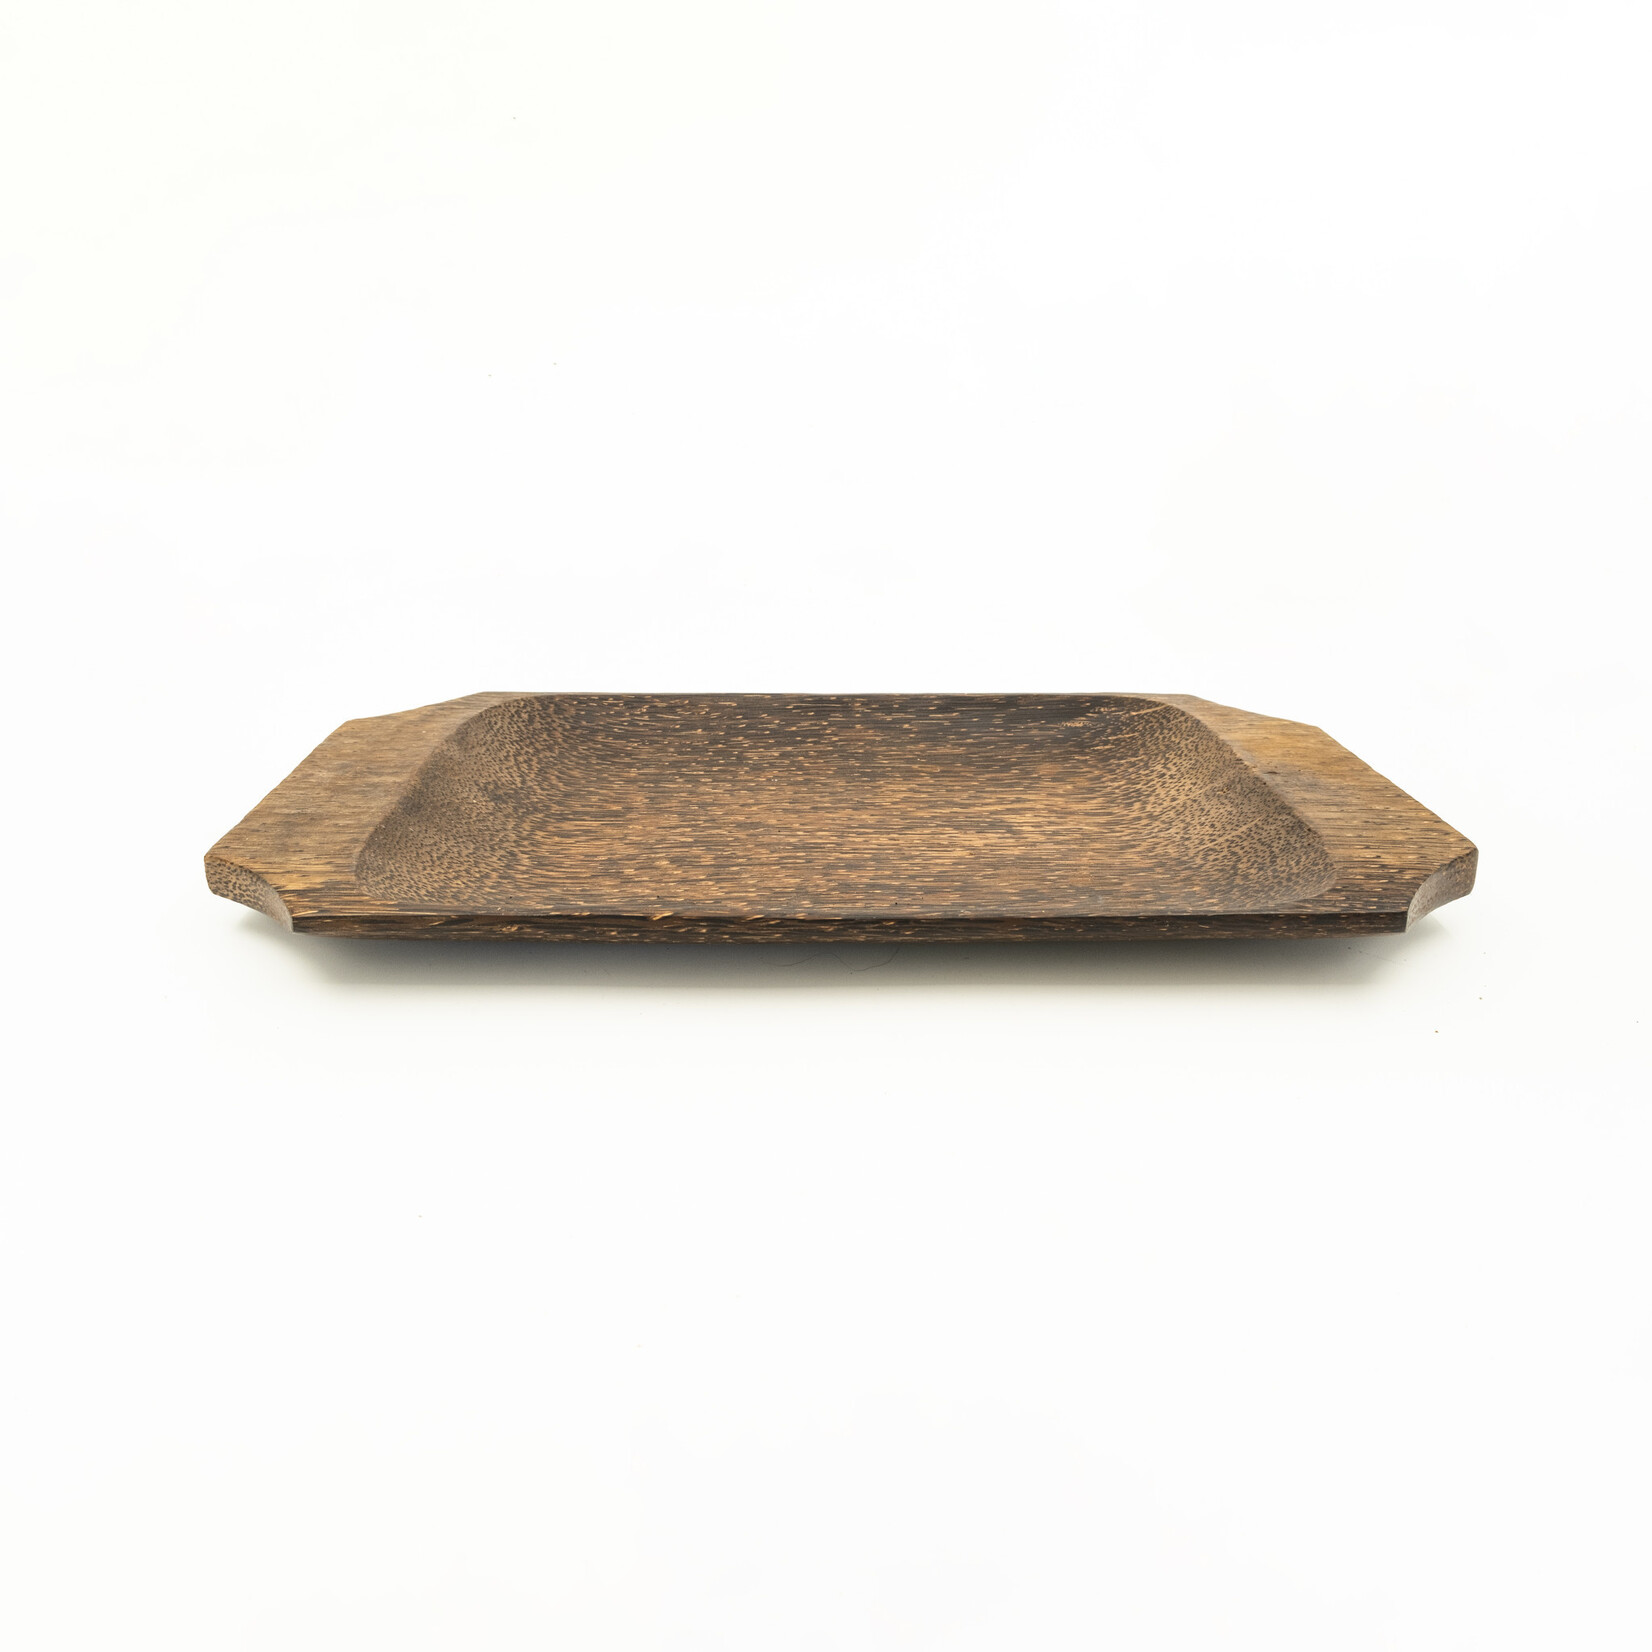 Hand Carved Palm Wood Tray 36cm x 18cm